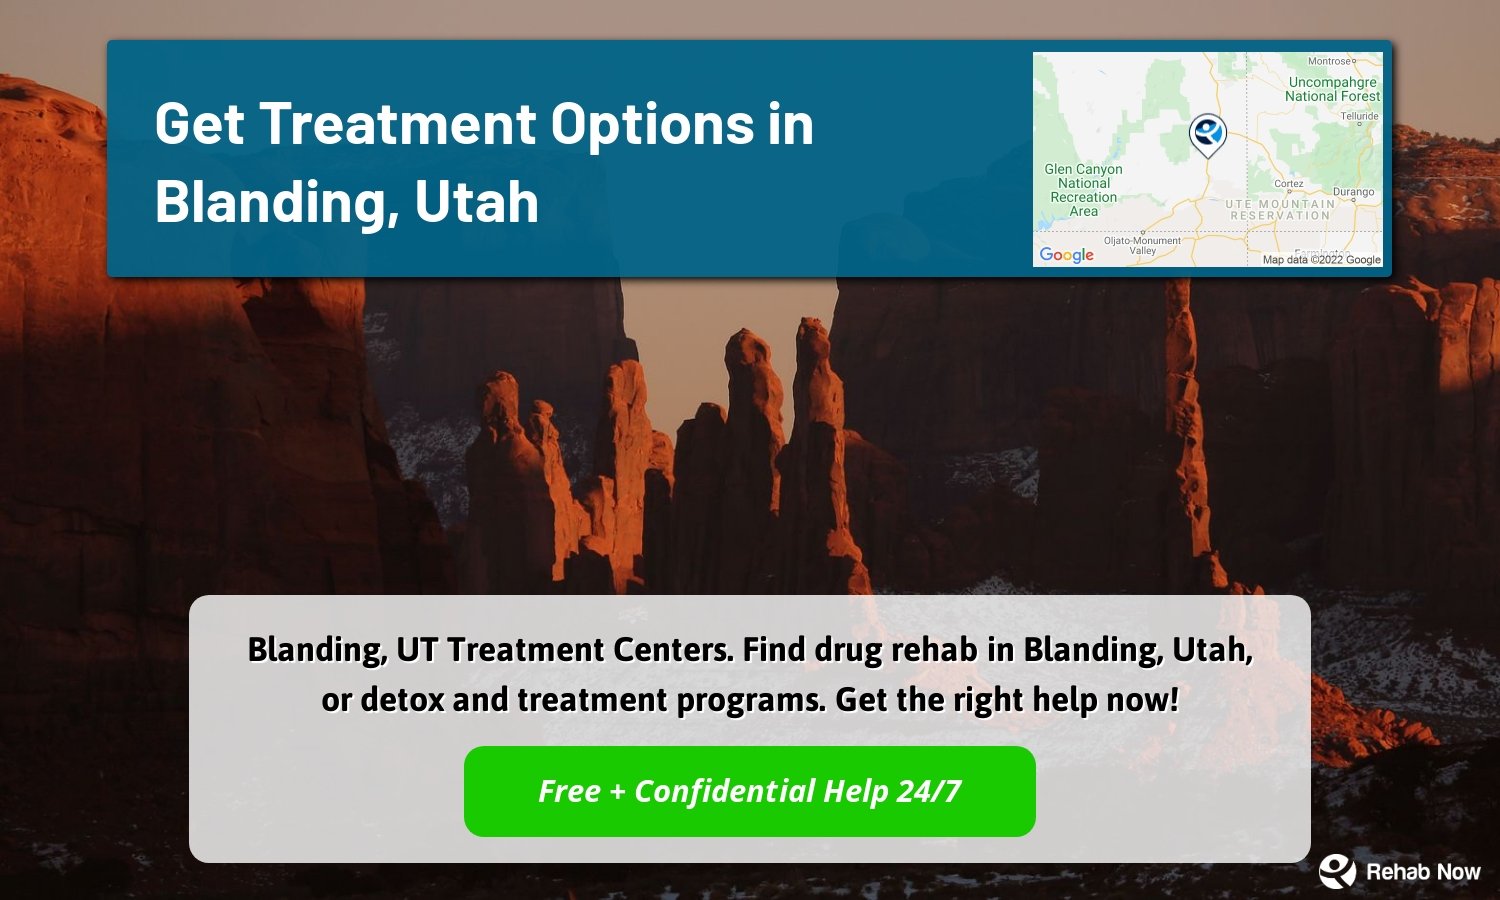 Blanding, UT Treatment Centers. Find drug rehab in Blanding, Utah, or detox and treatment programs. Get the right help now!